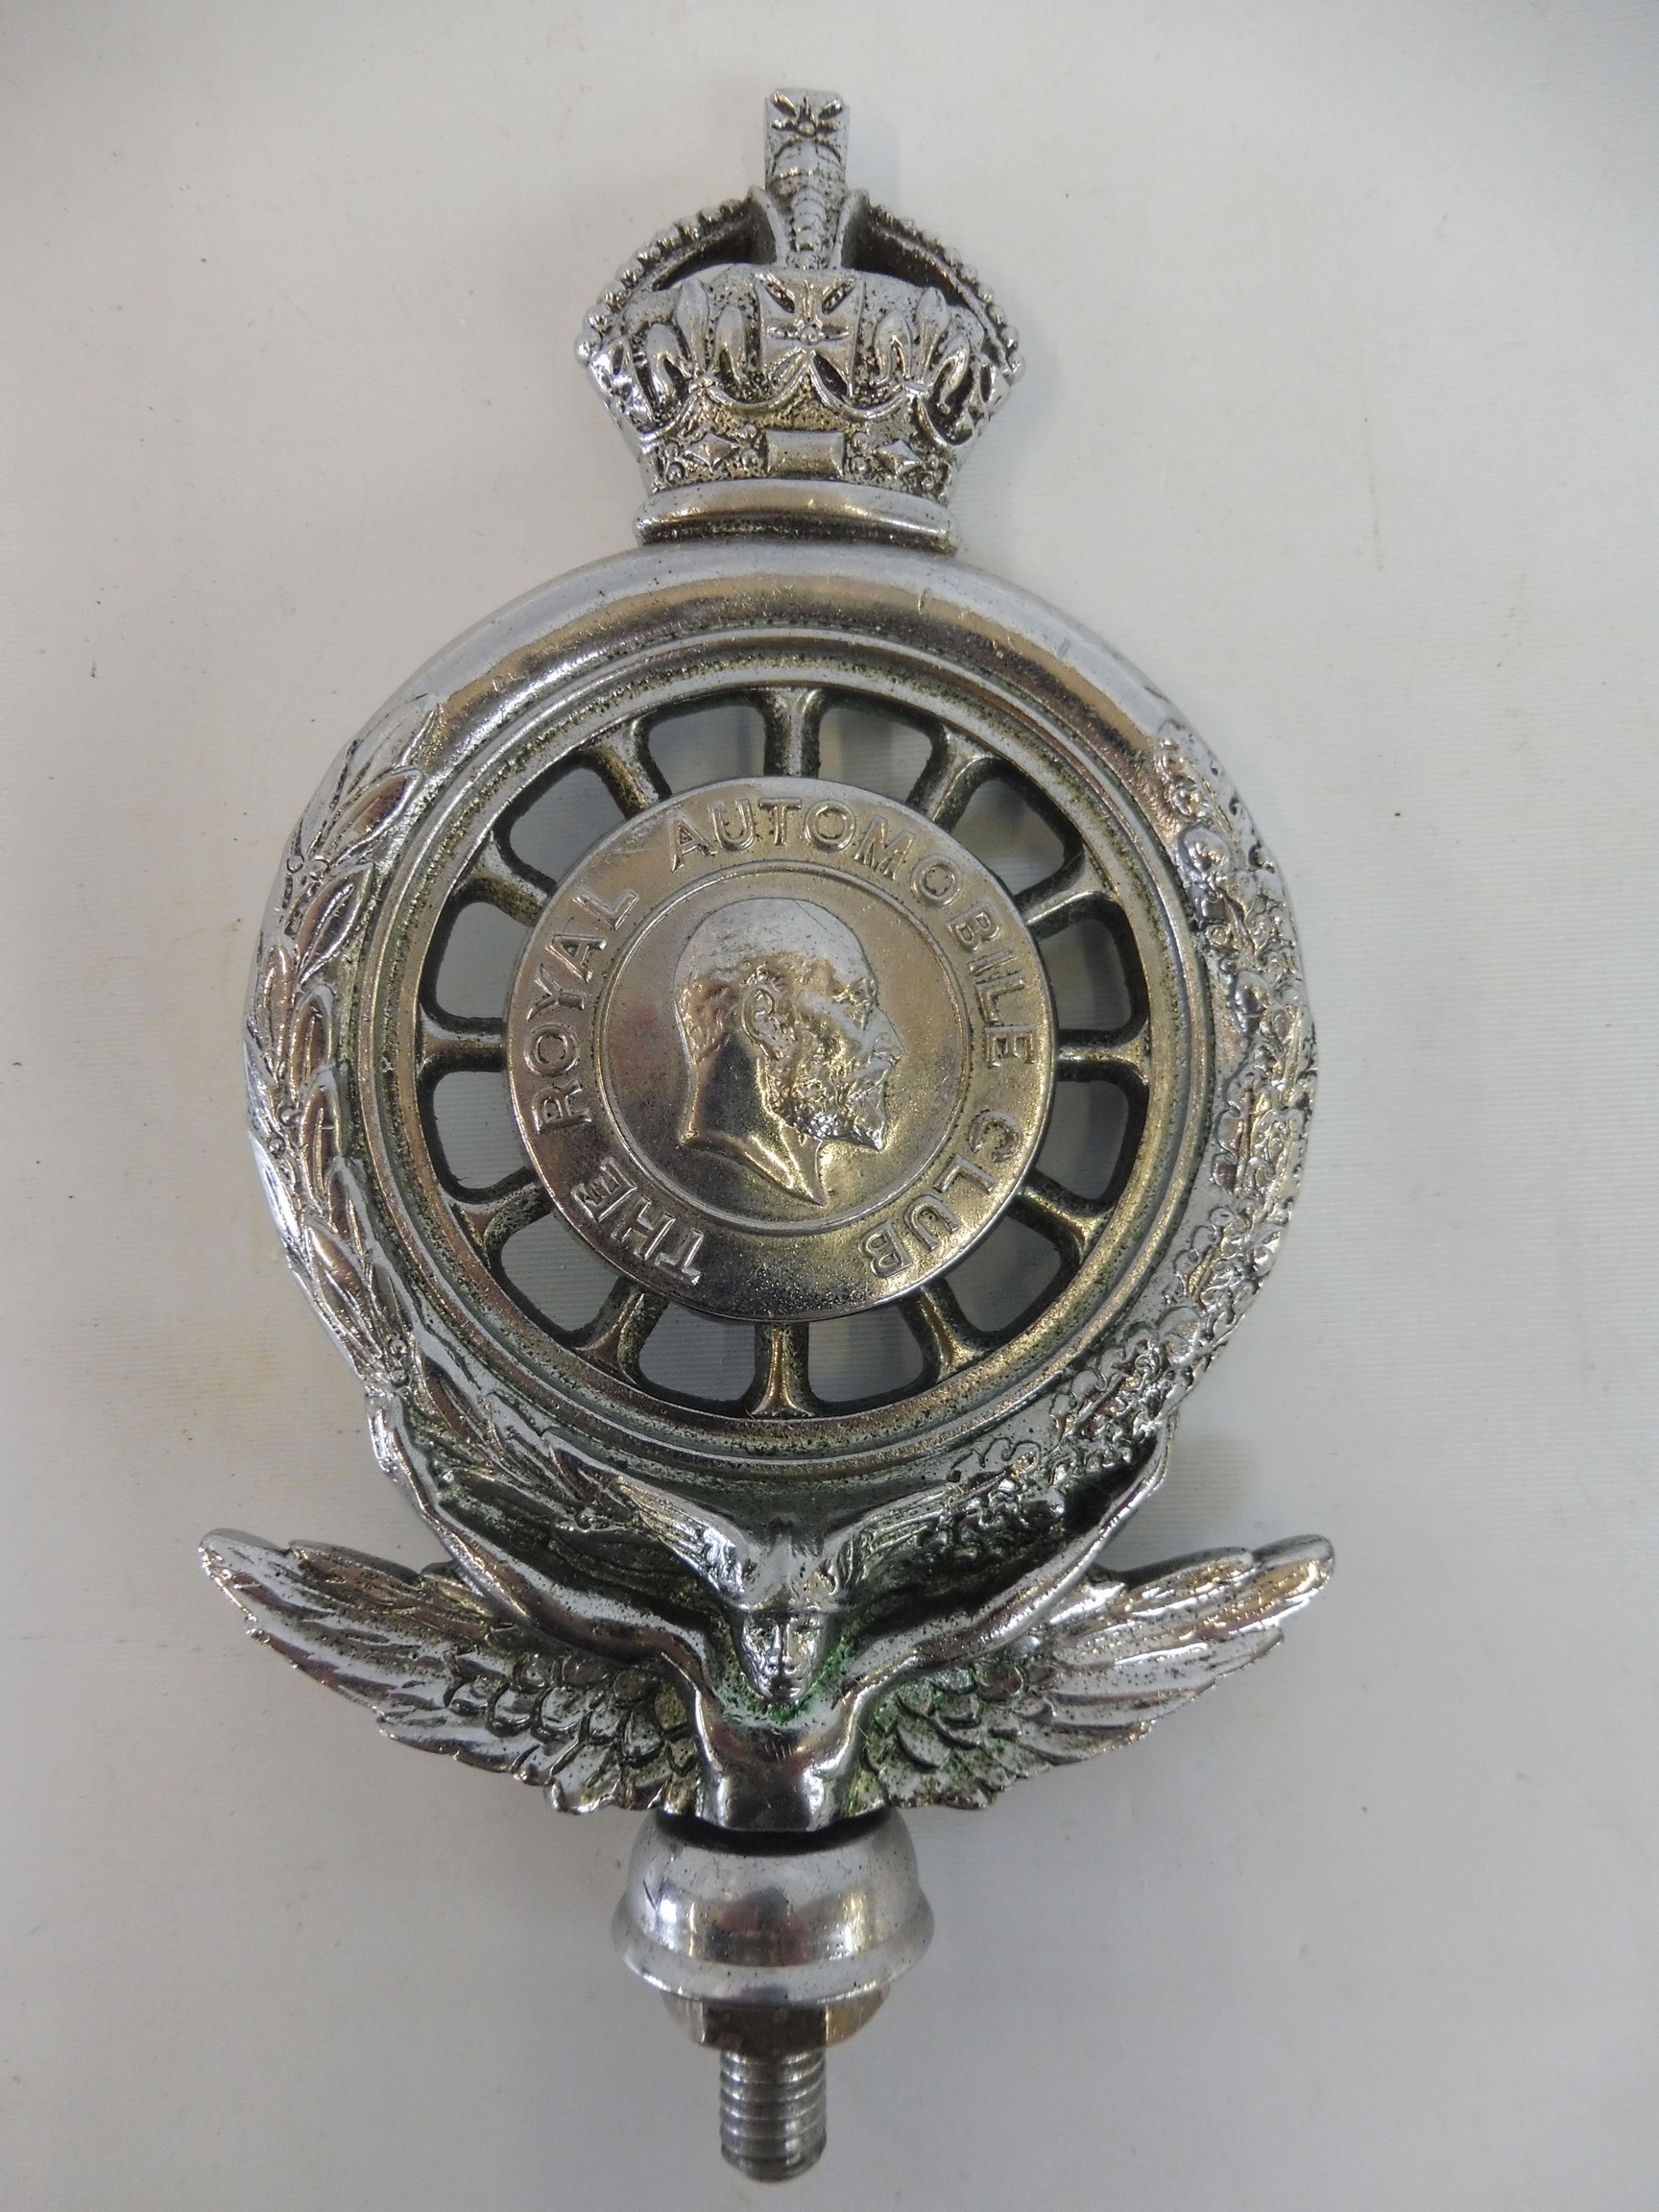 A large Royal Automobile Club full member car badge, chrome plated solid brass, with oblong enamel - Image 2 of 2